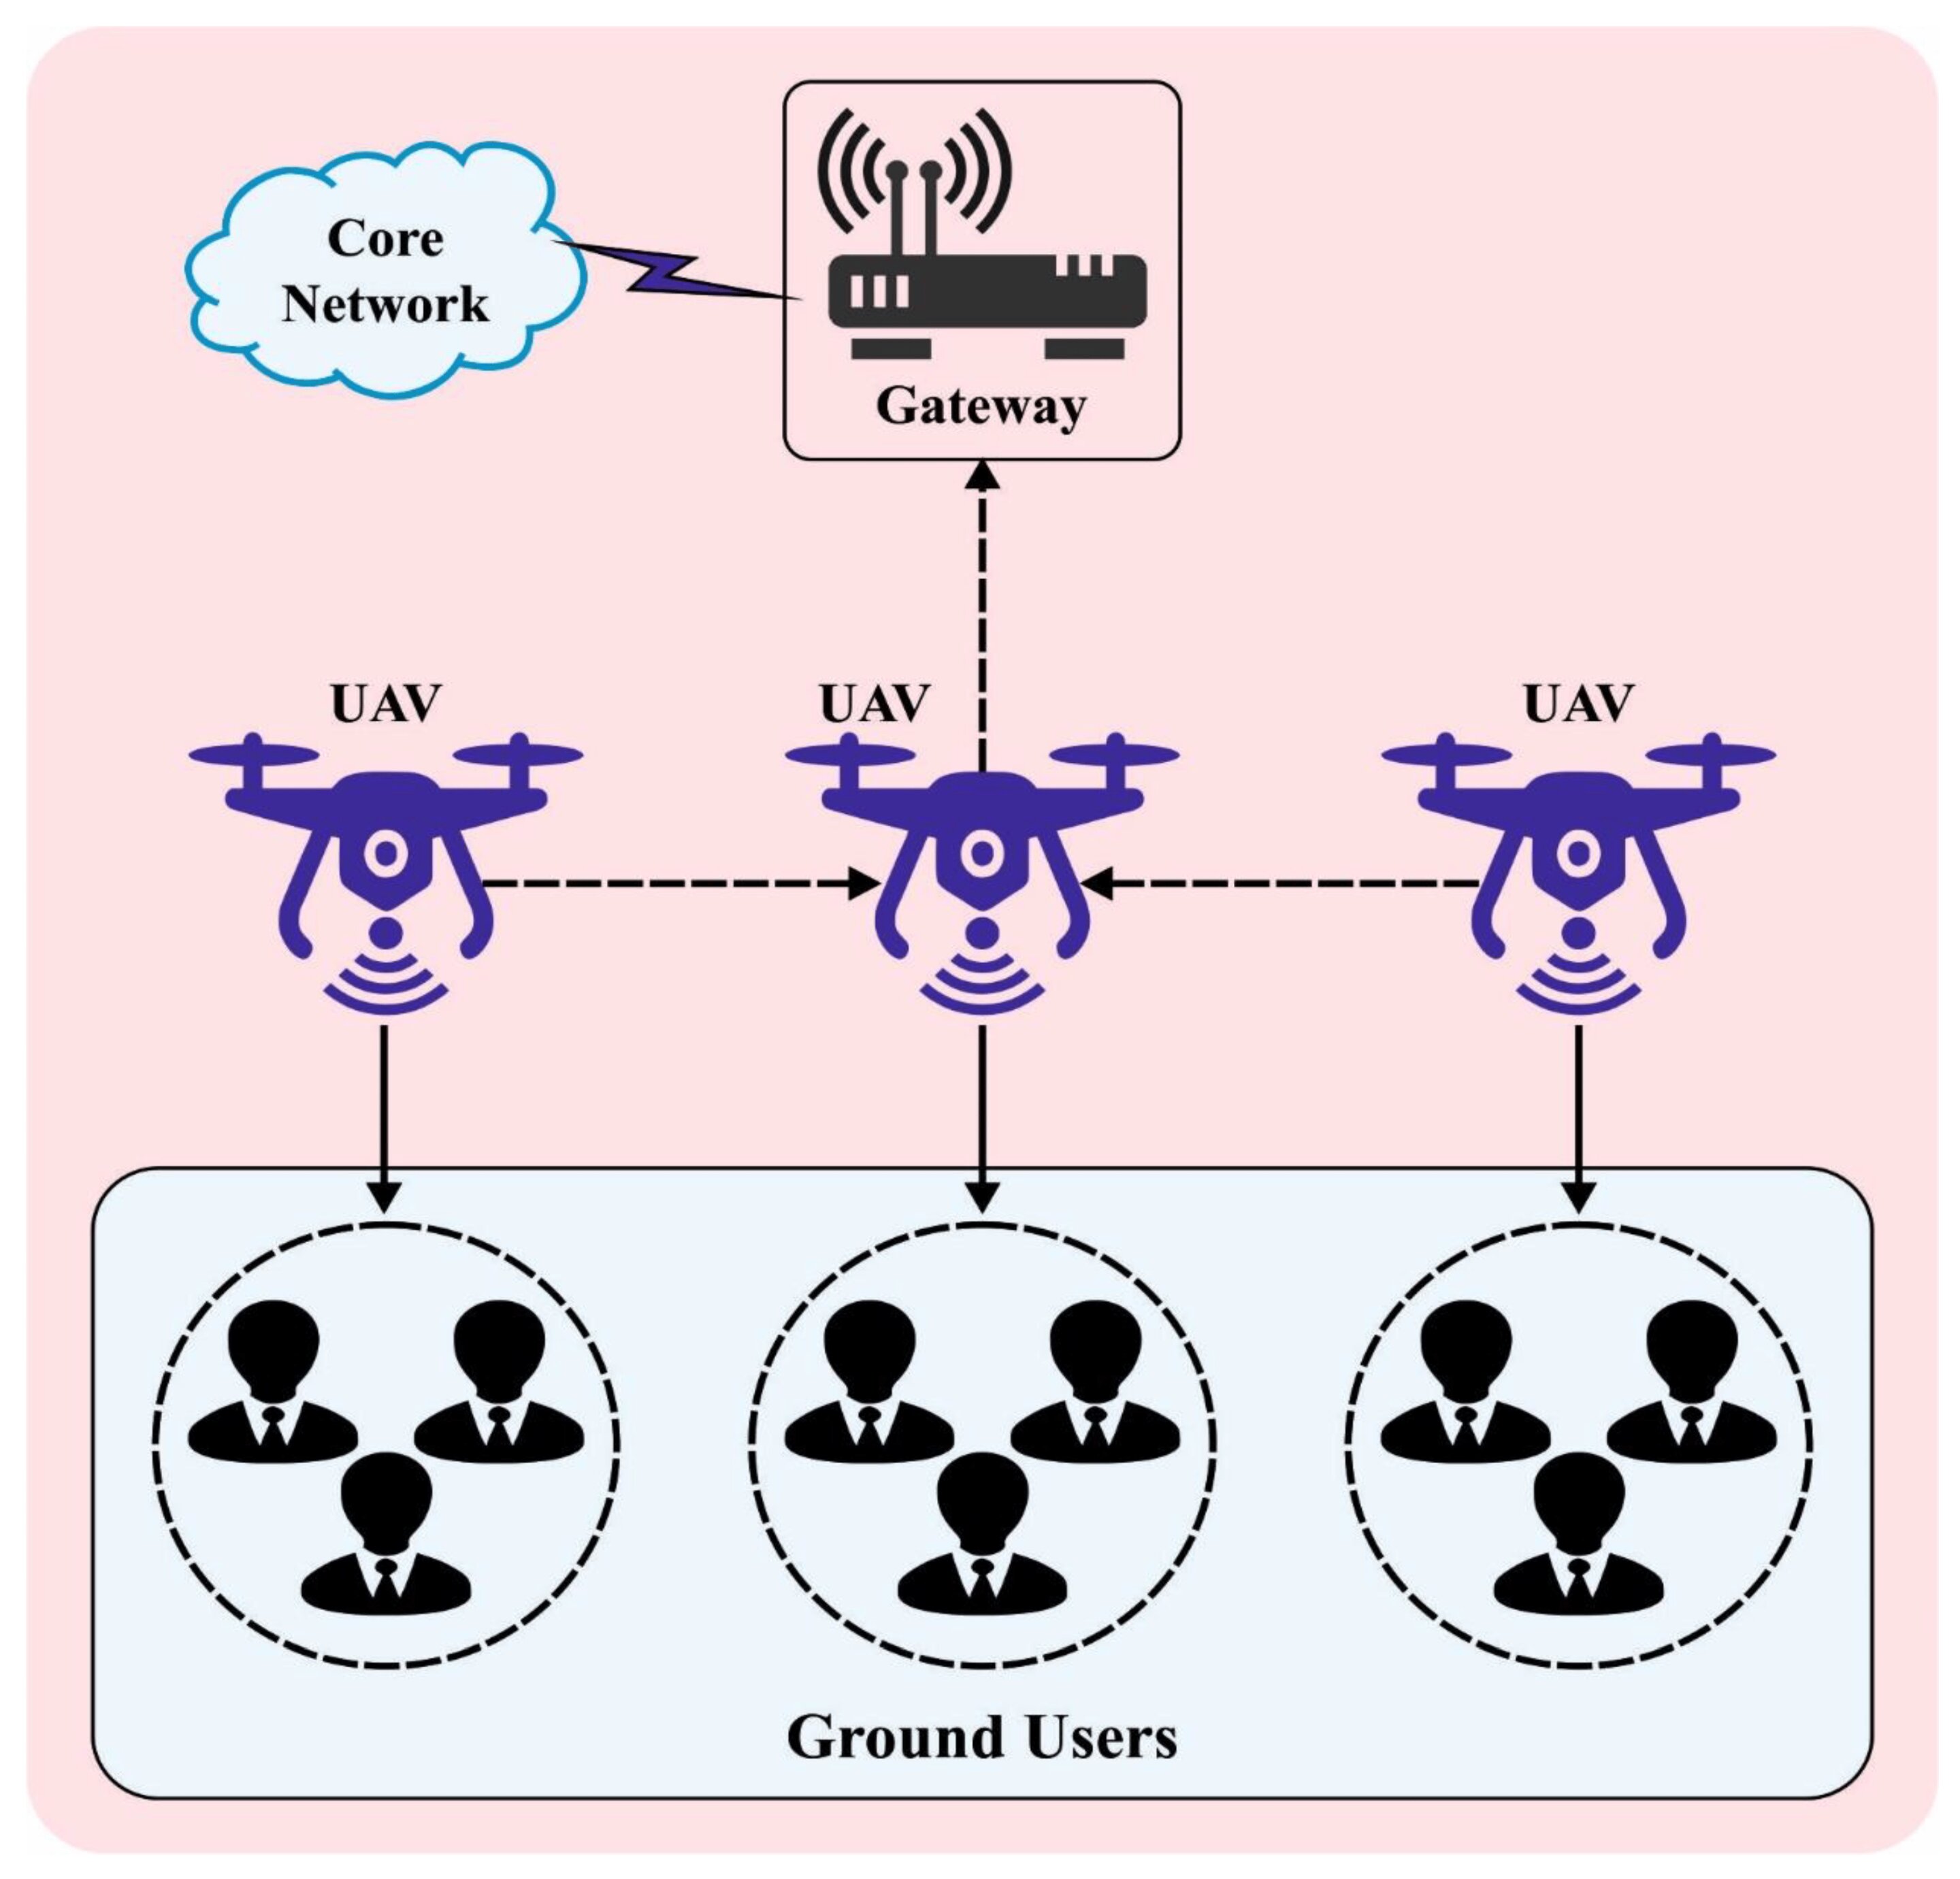 #Improving energy efficiency of Wi-Fi networks on drones using slime mold method and a neural network